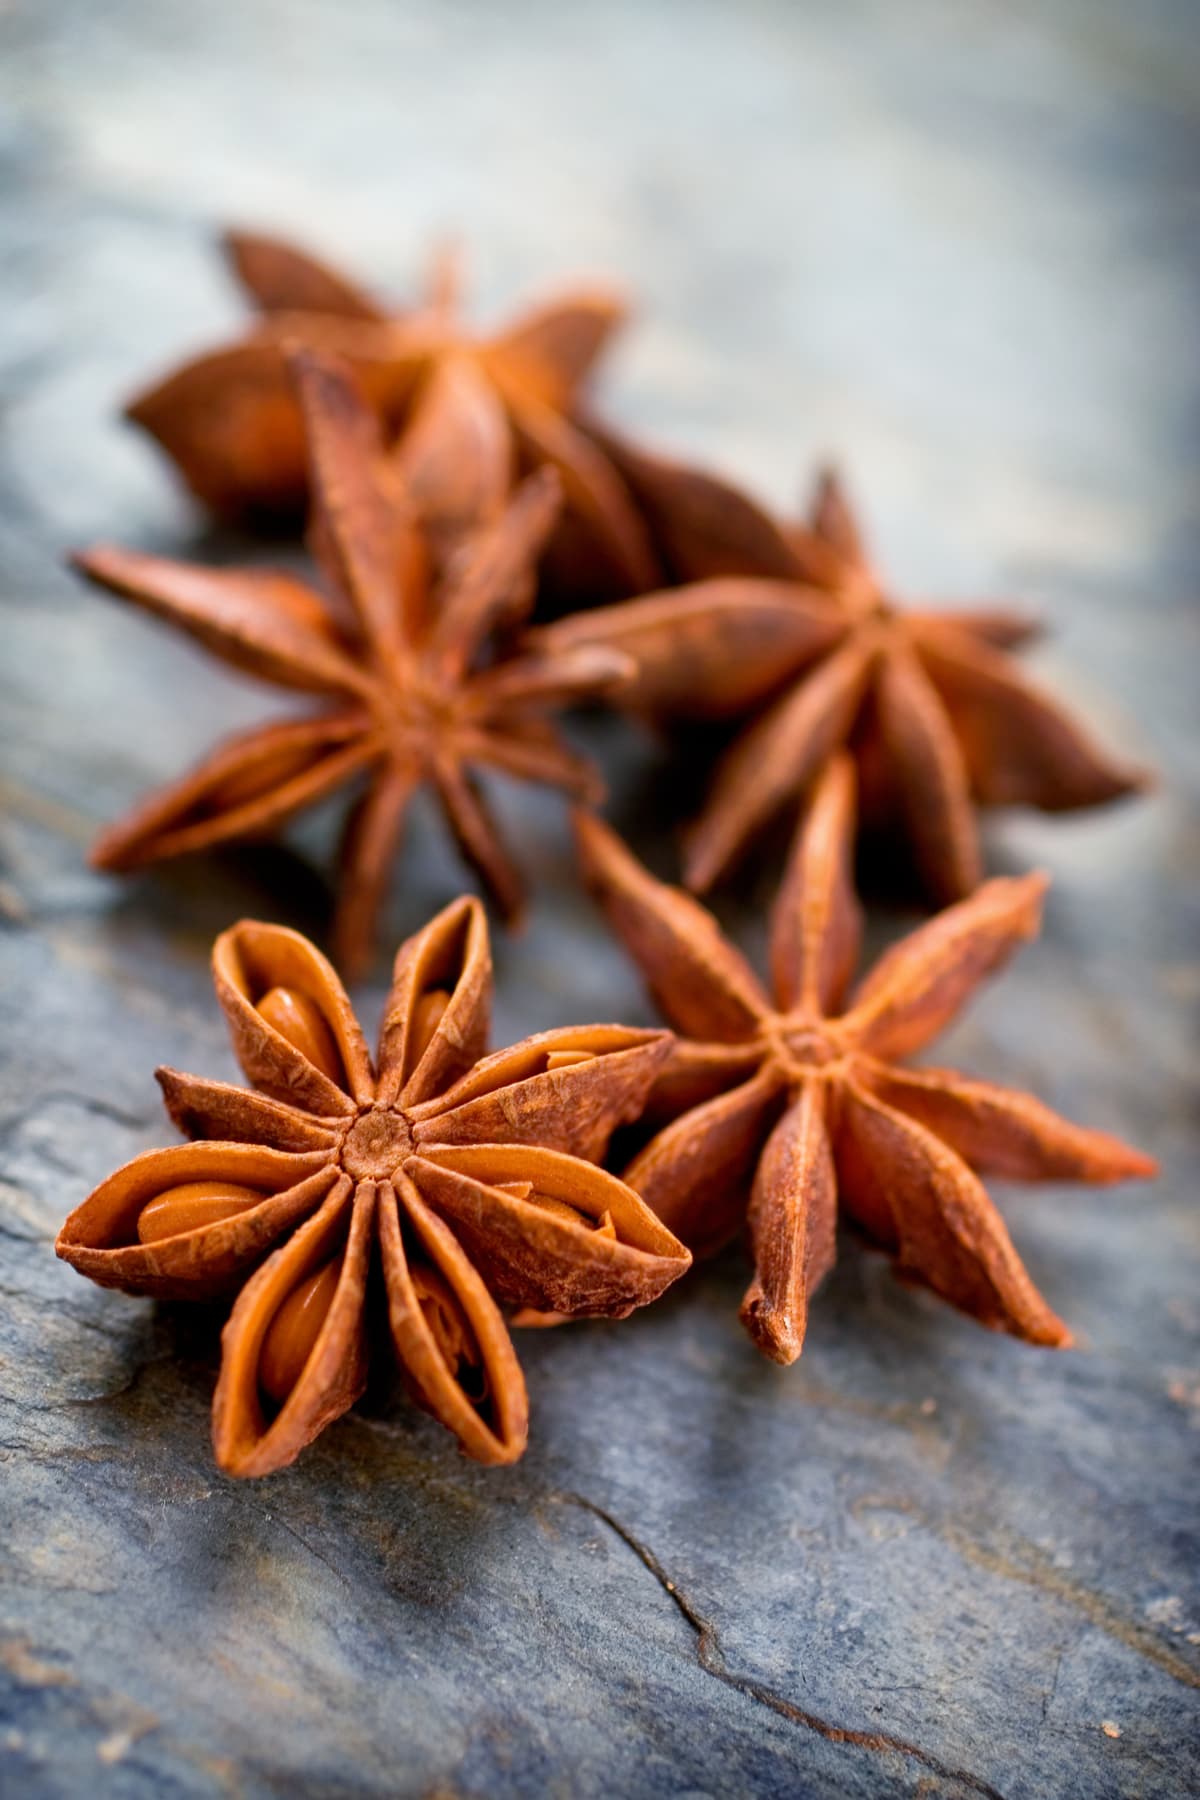 Star Anise spice, delicious licoricey flavor.  Shallow dof.